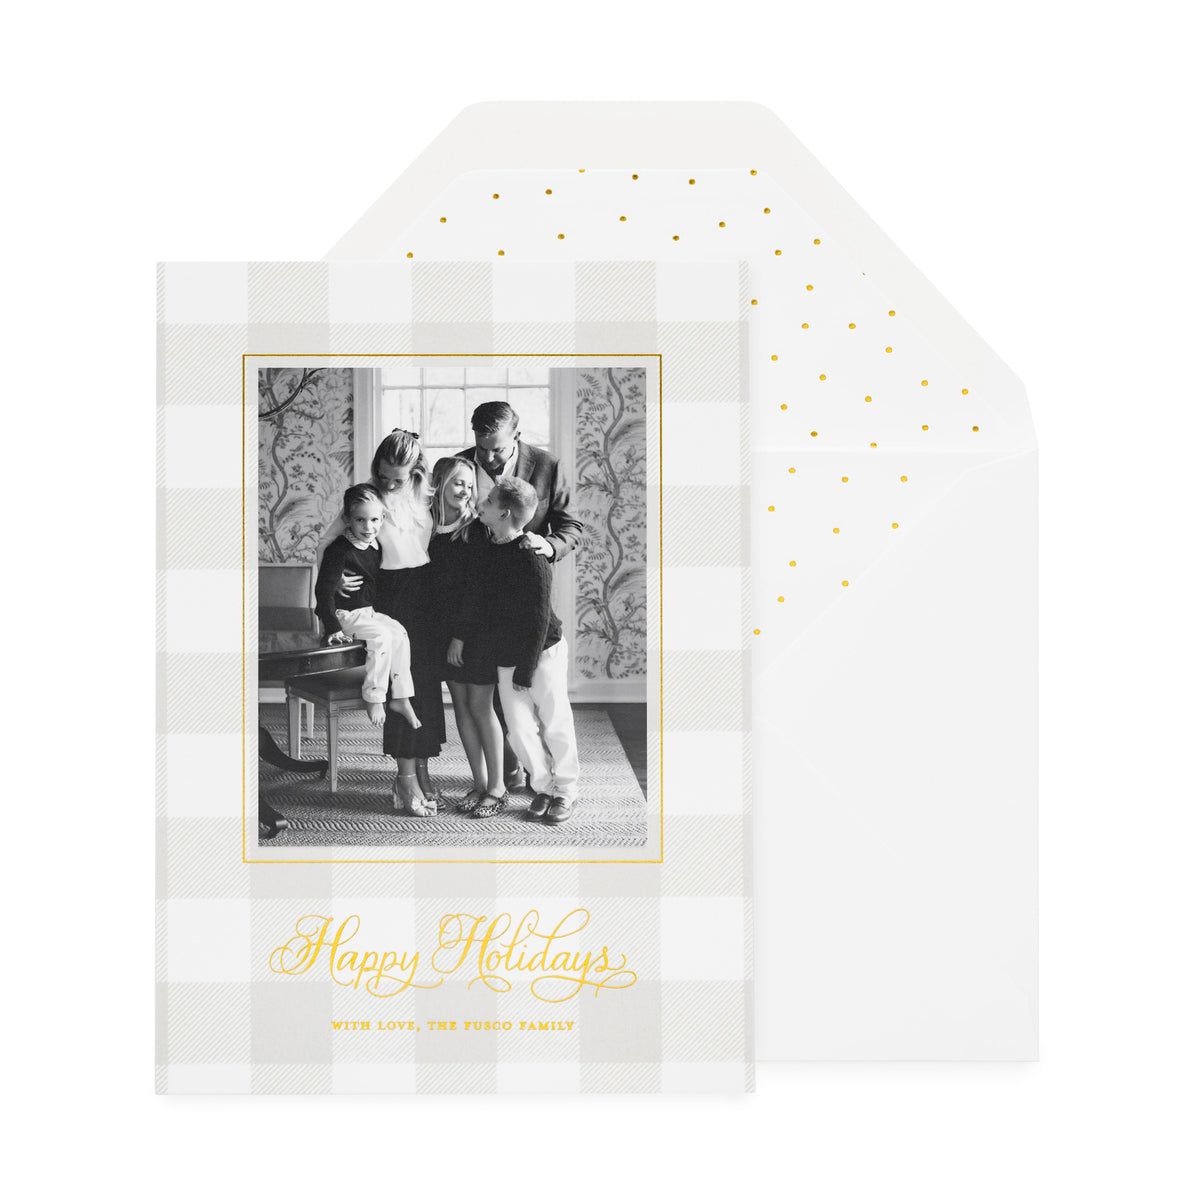 Grey gingham custom holiday photo card with gold foil